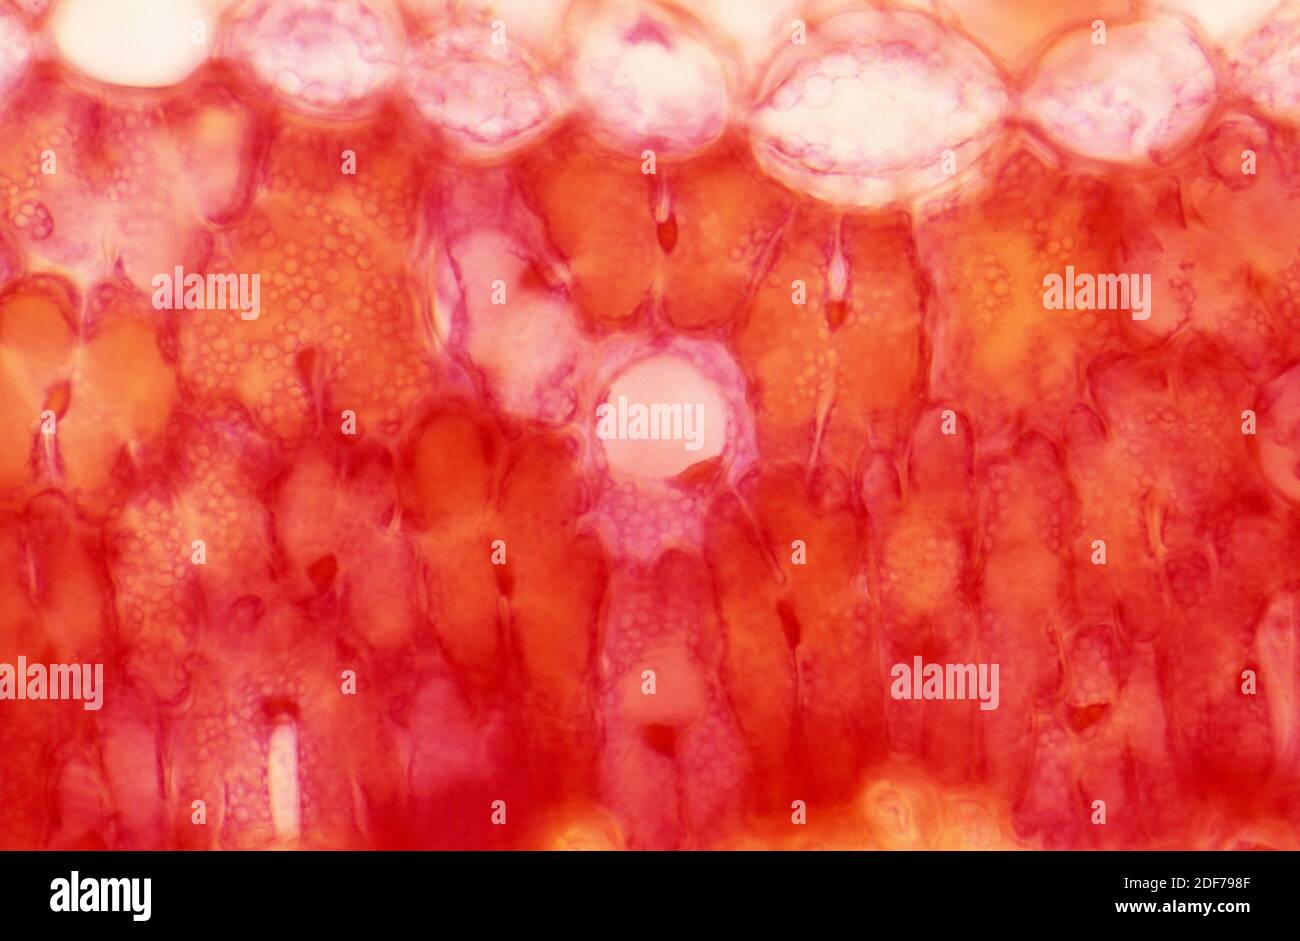 Resin chanel on Pinus sp. tissue. Photomicrograph. Stock Photo